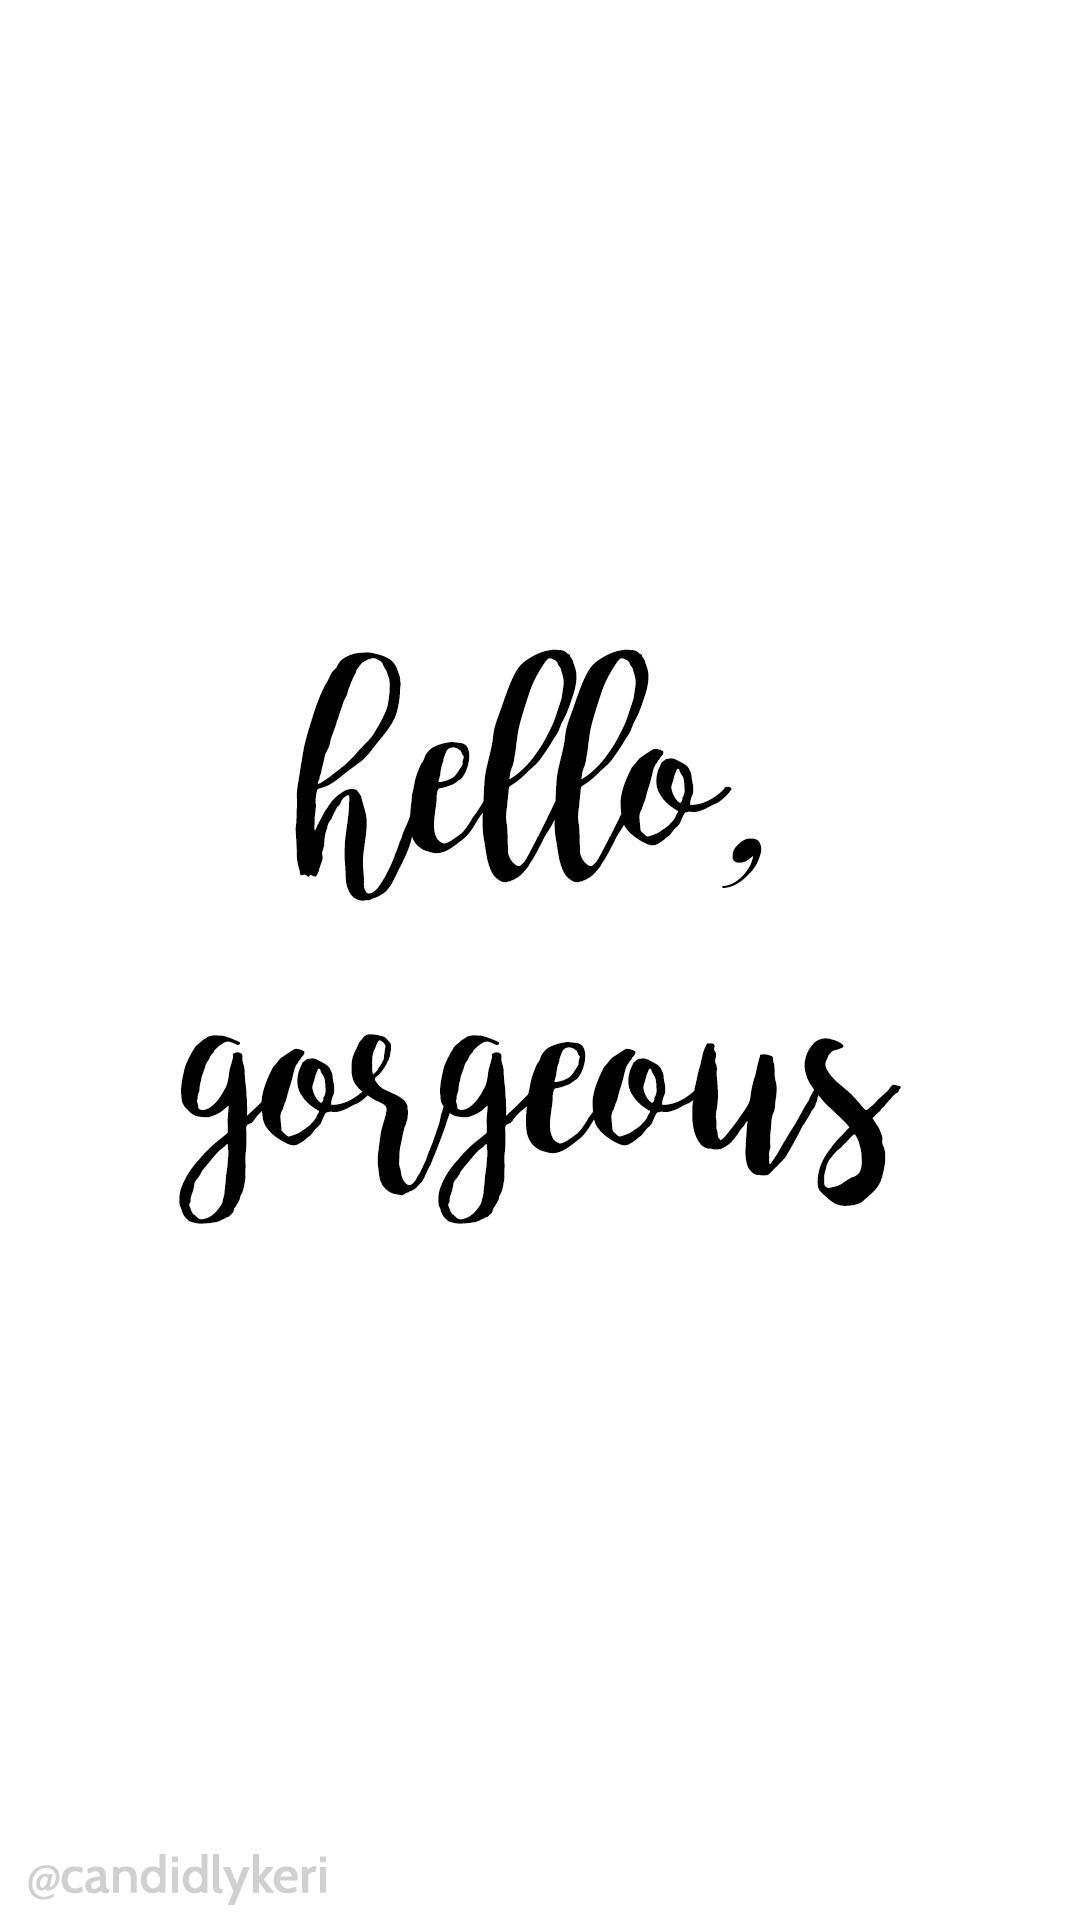 Hello Gorgeous simple script black and white wallpaper background iphone, android, desktop for free